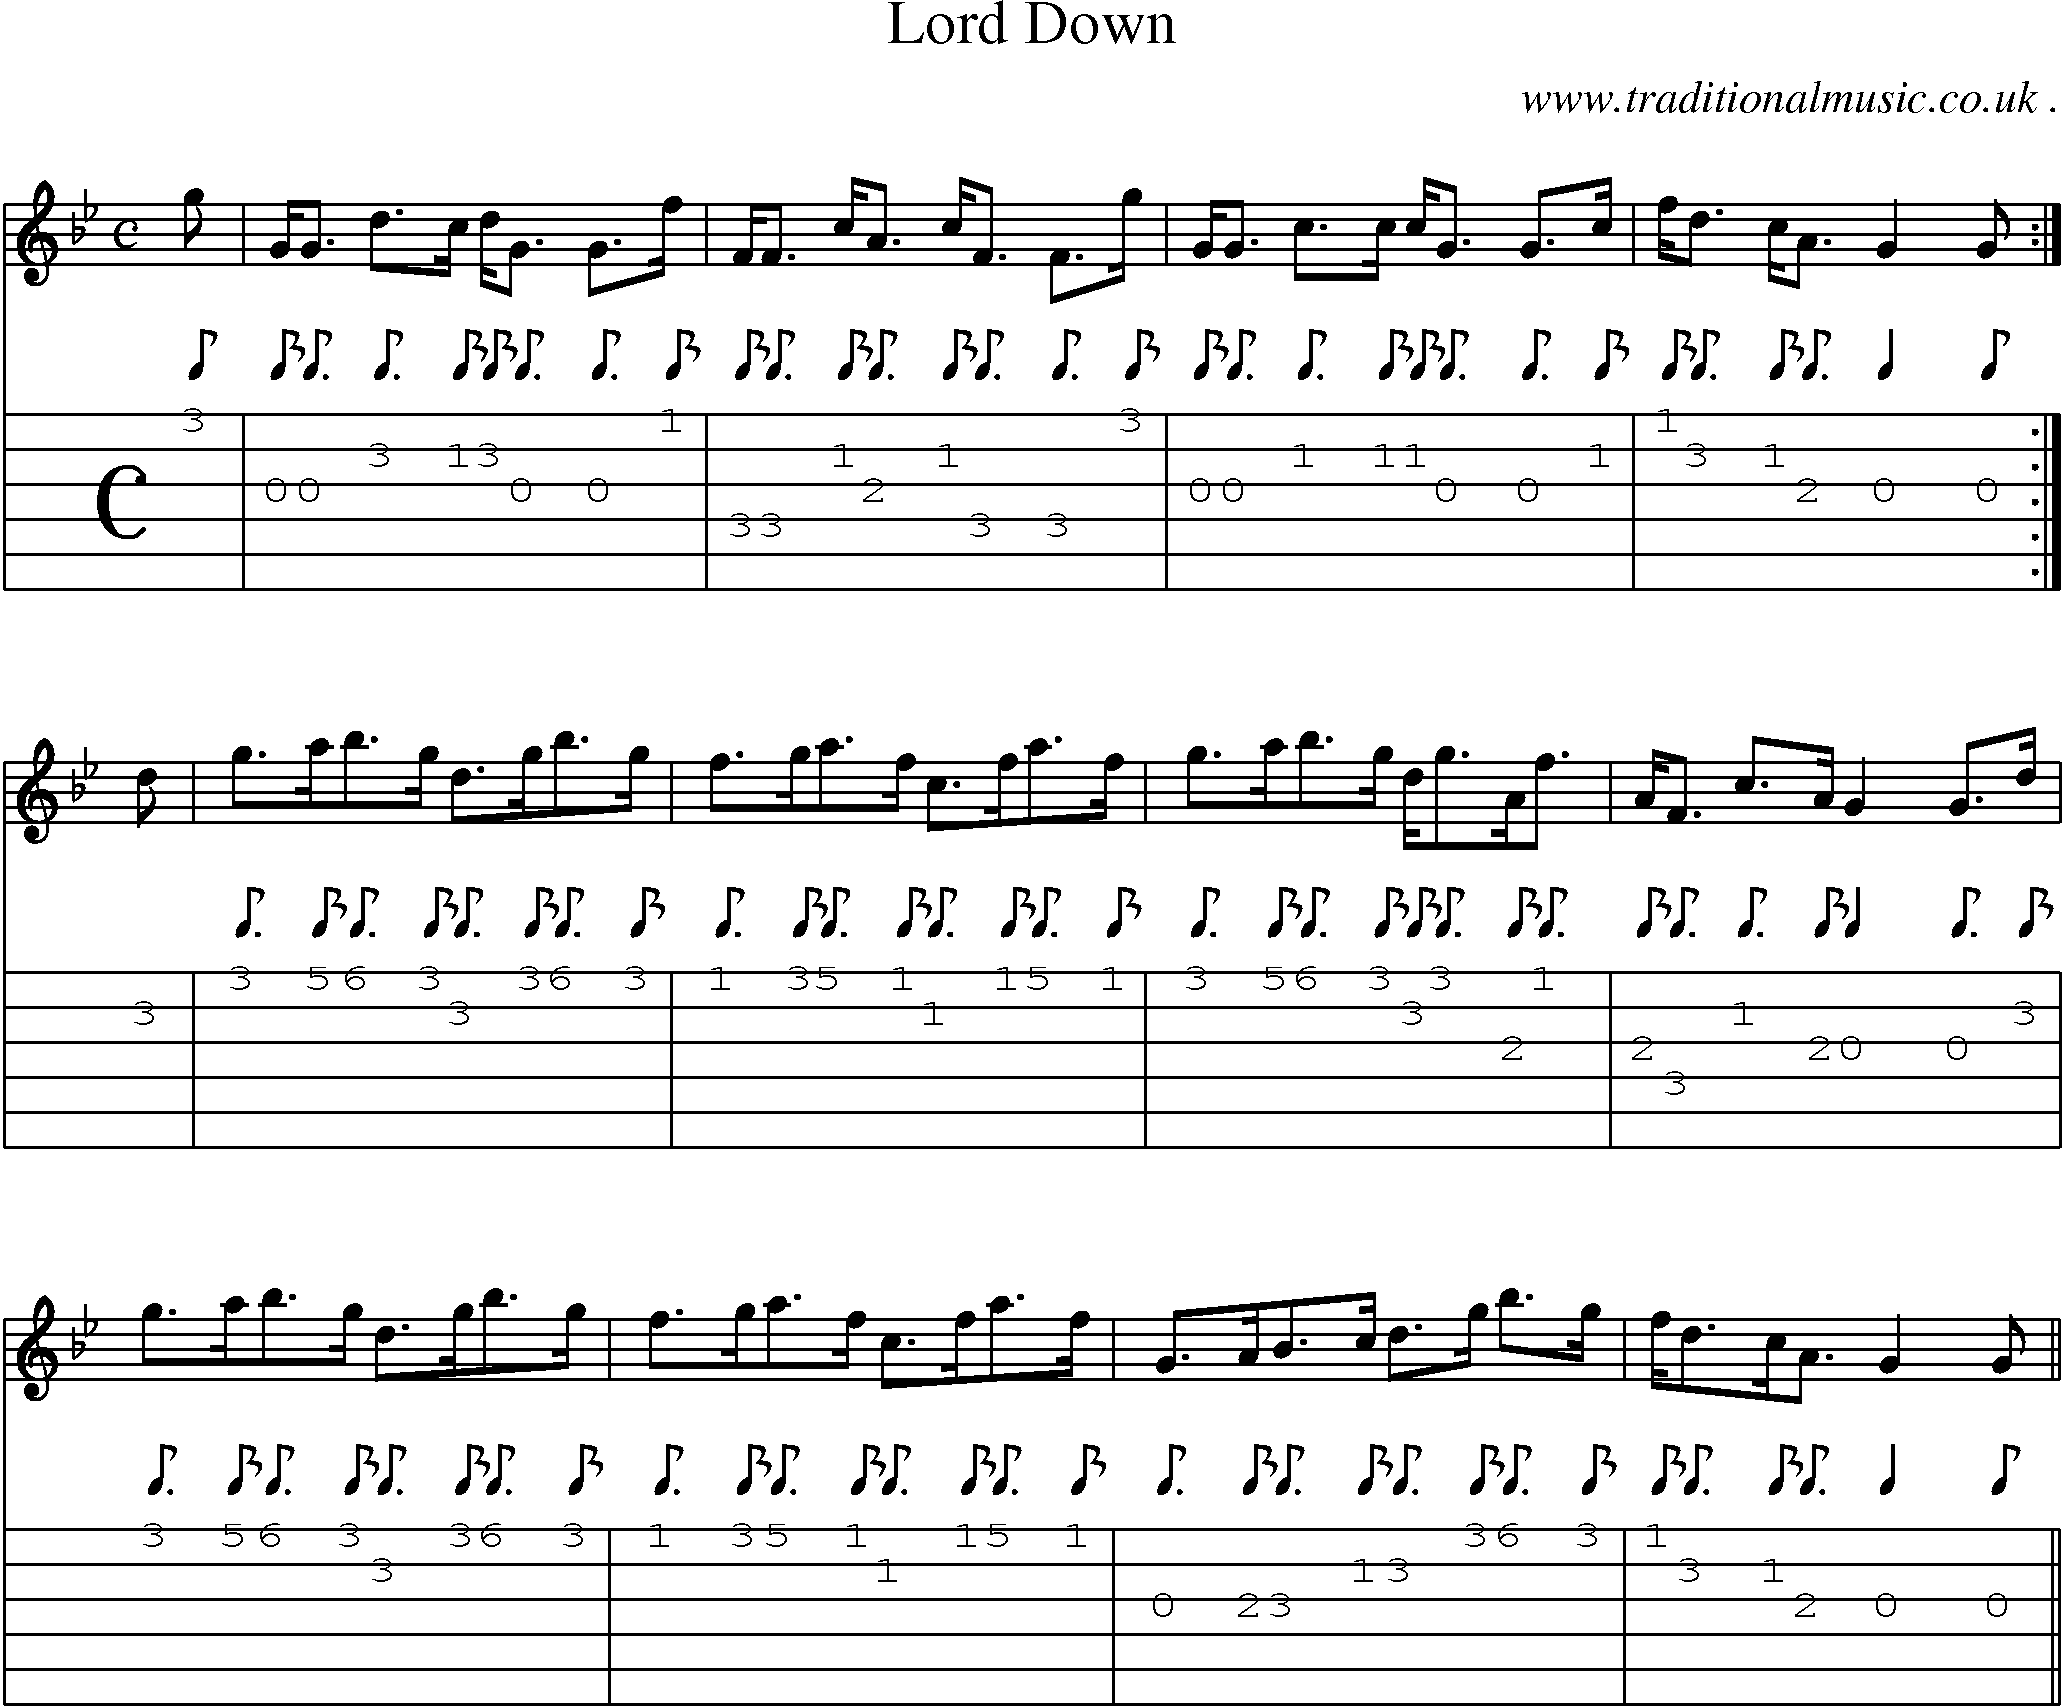 Sheet-music  score, Chords and Guitar Tabs for Lord Down